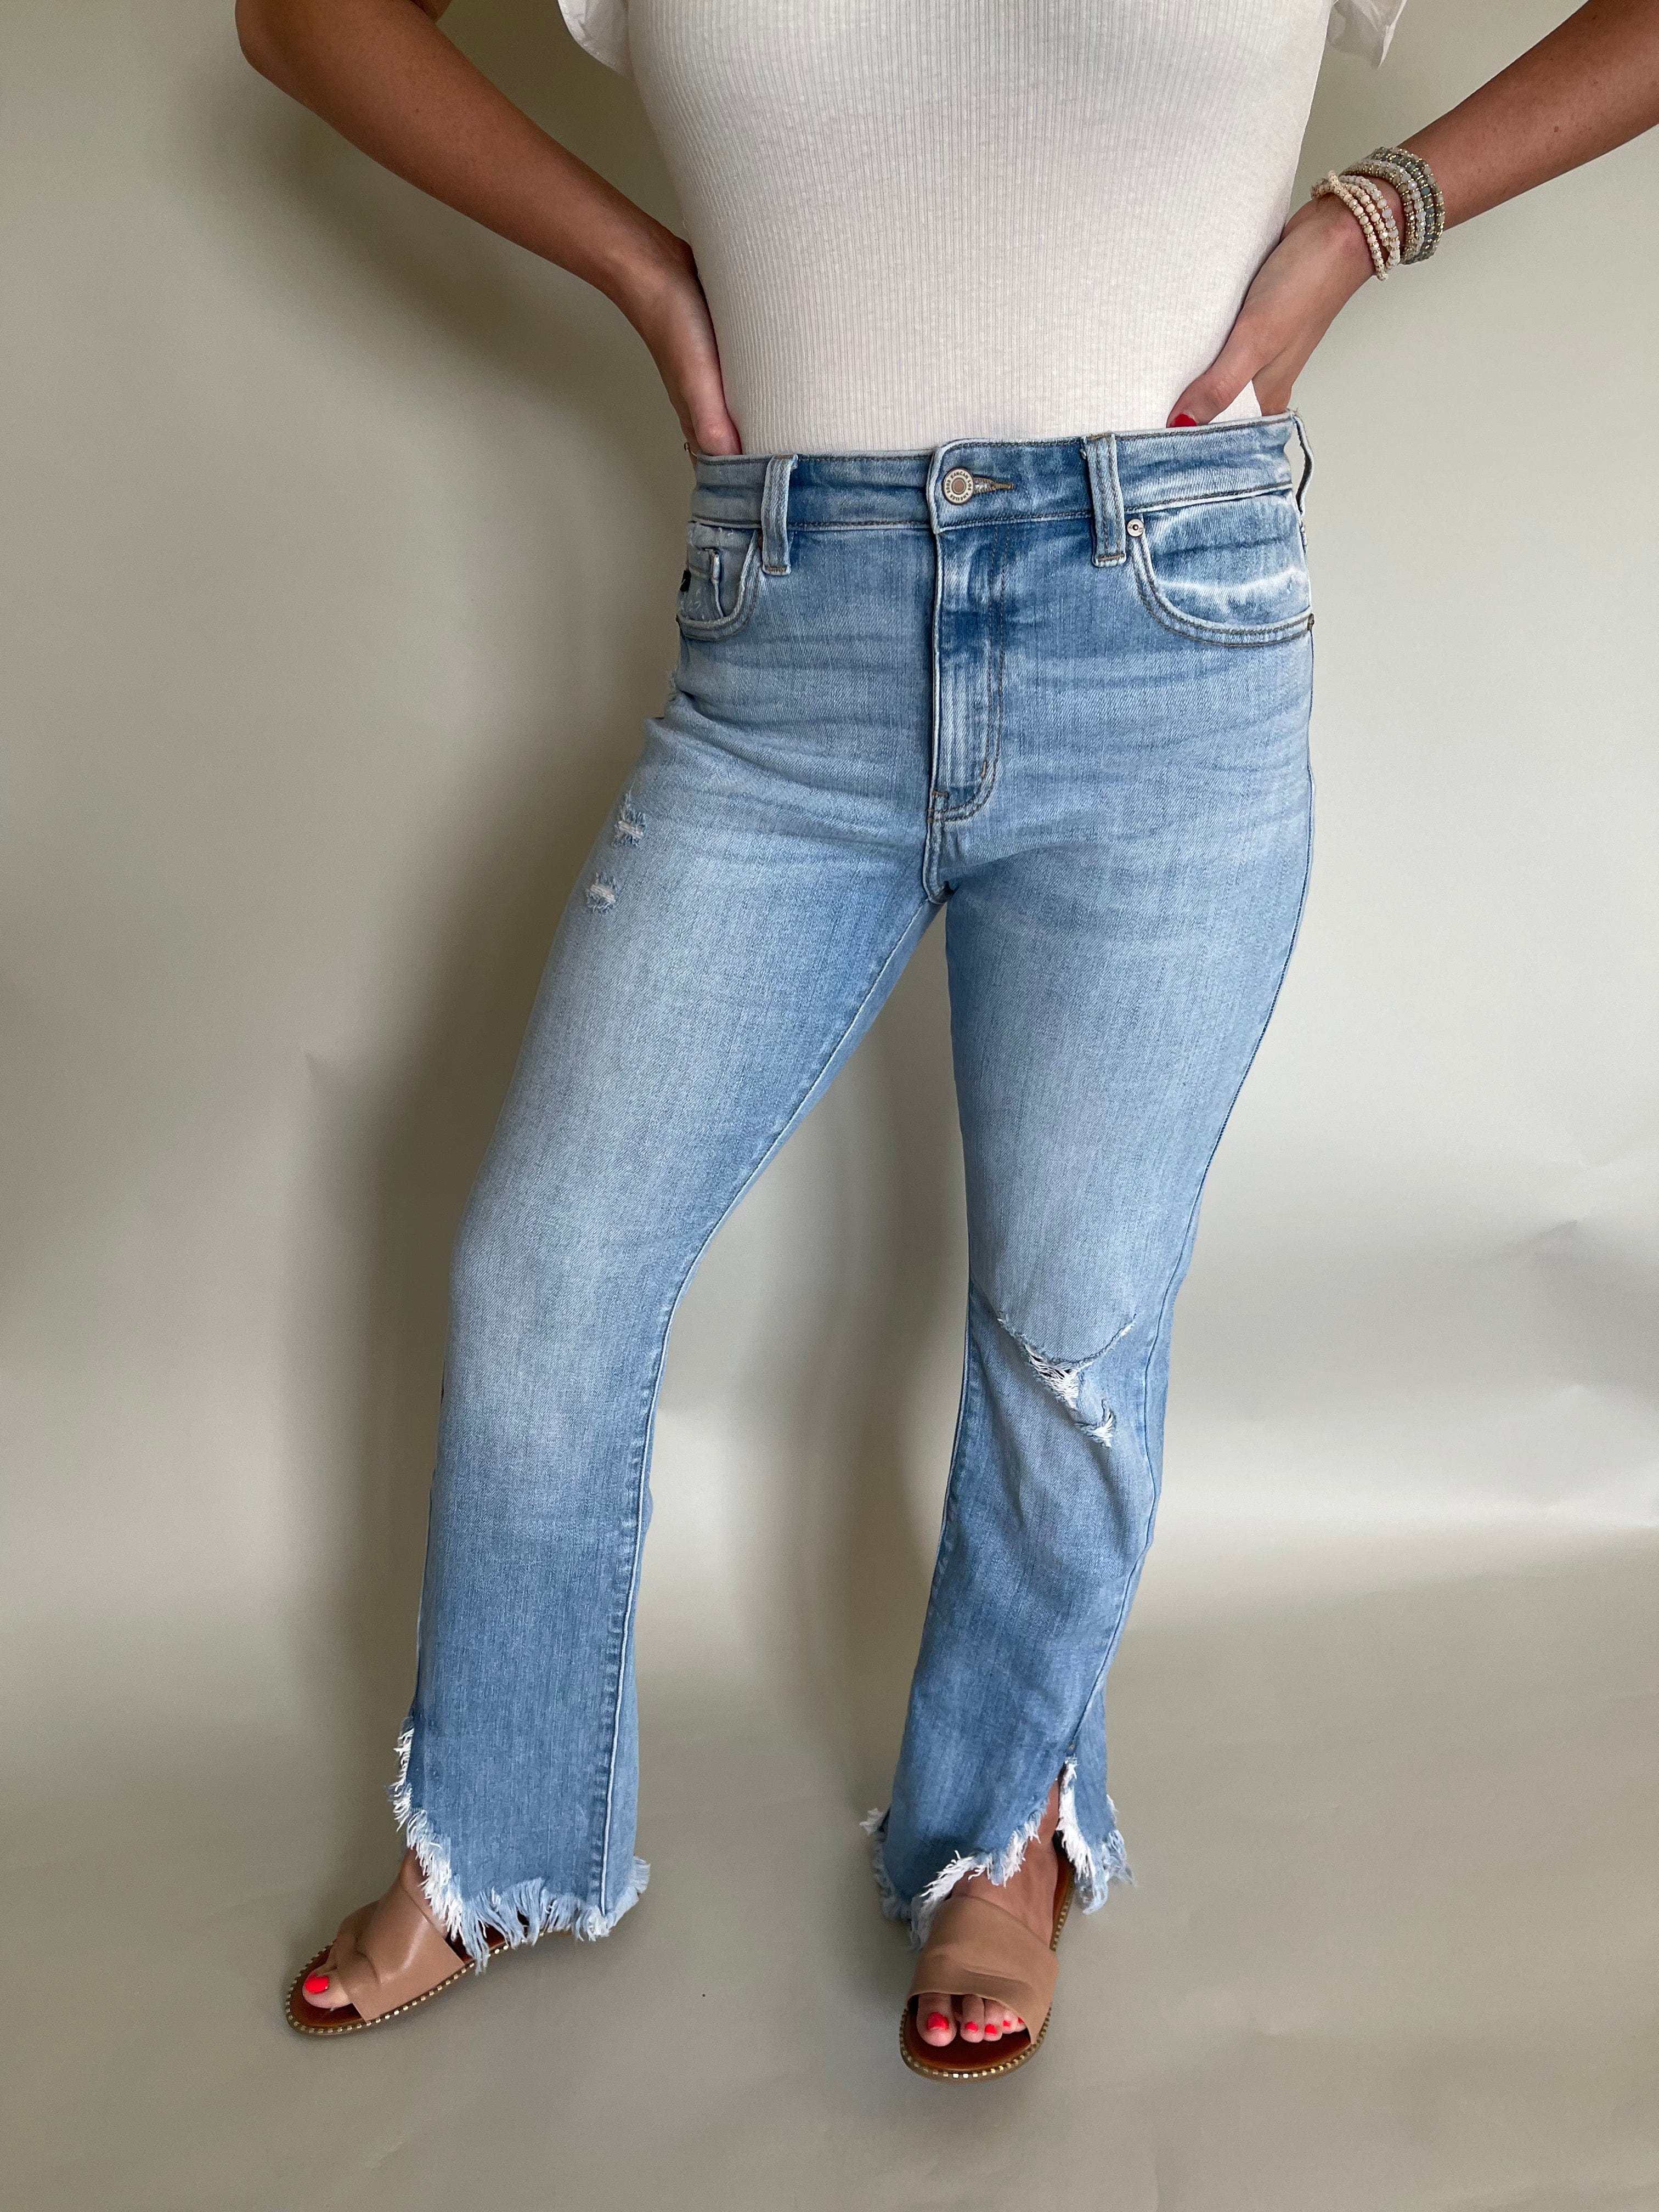 Yes I Kan Can Light Wash Frayed Denim Jeans – Made Mac